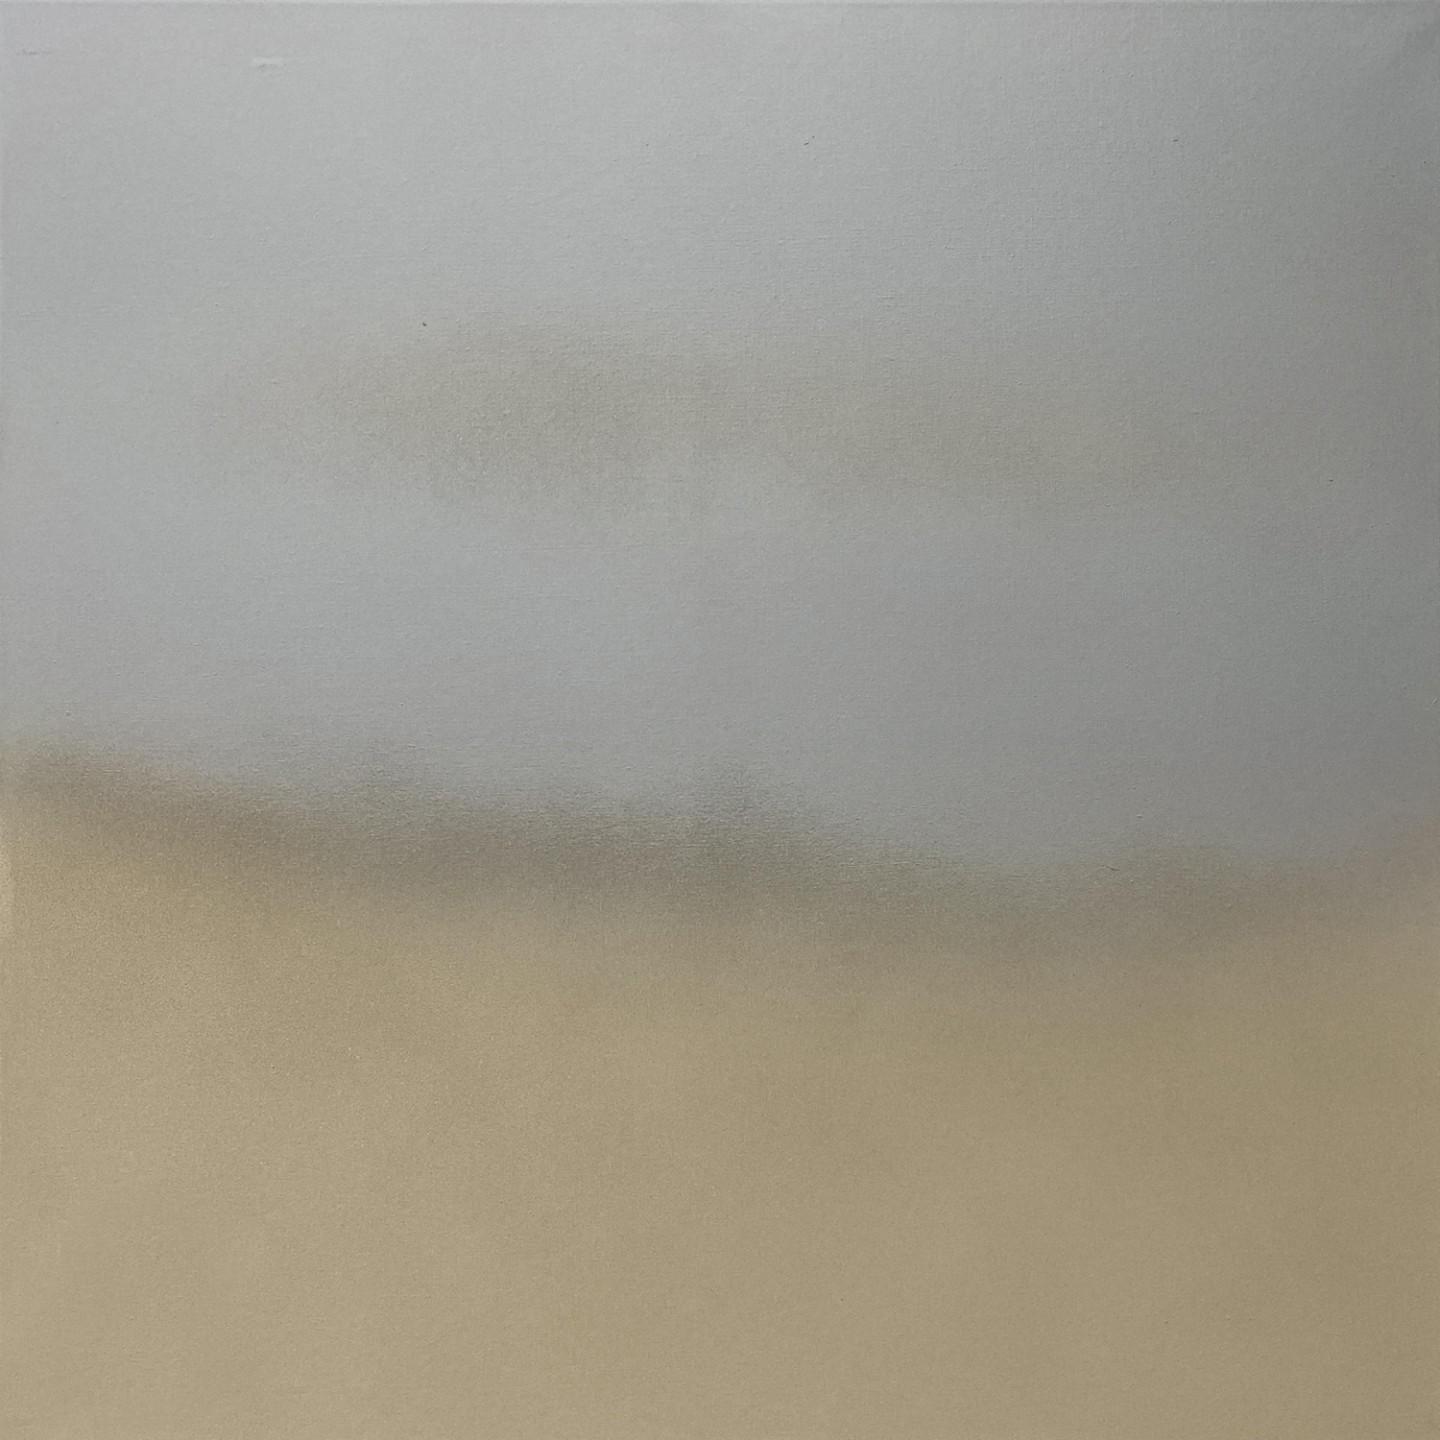 image in soft grey and light brown colours